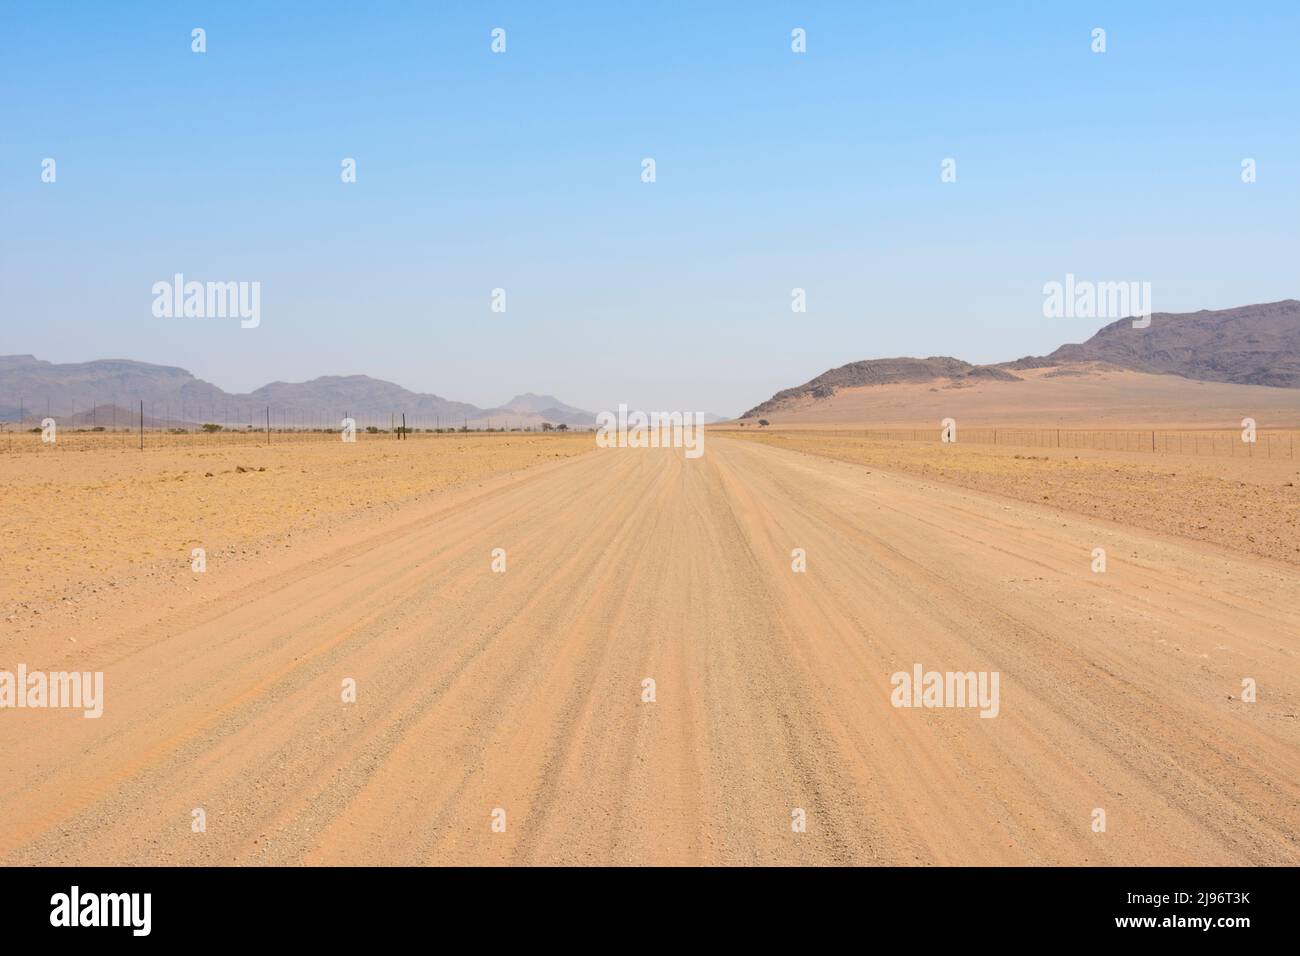 Landscape view of the endless horizons of the Tsaris Pass (on the C19 road through the Tsaris Mountains) in the Namib Desert, Namibia, Southern Africa Stock Photo